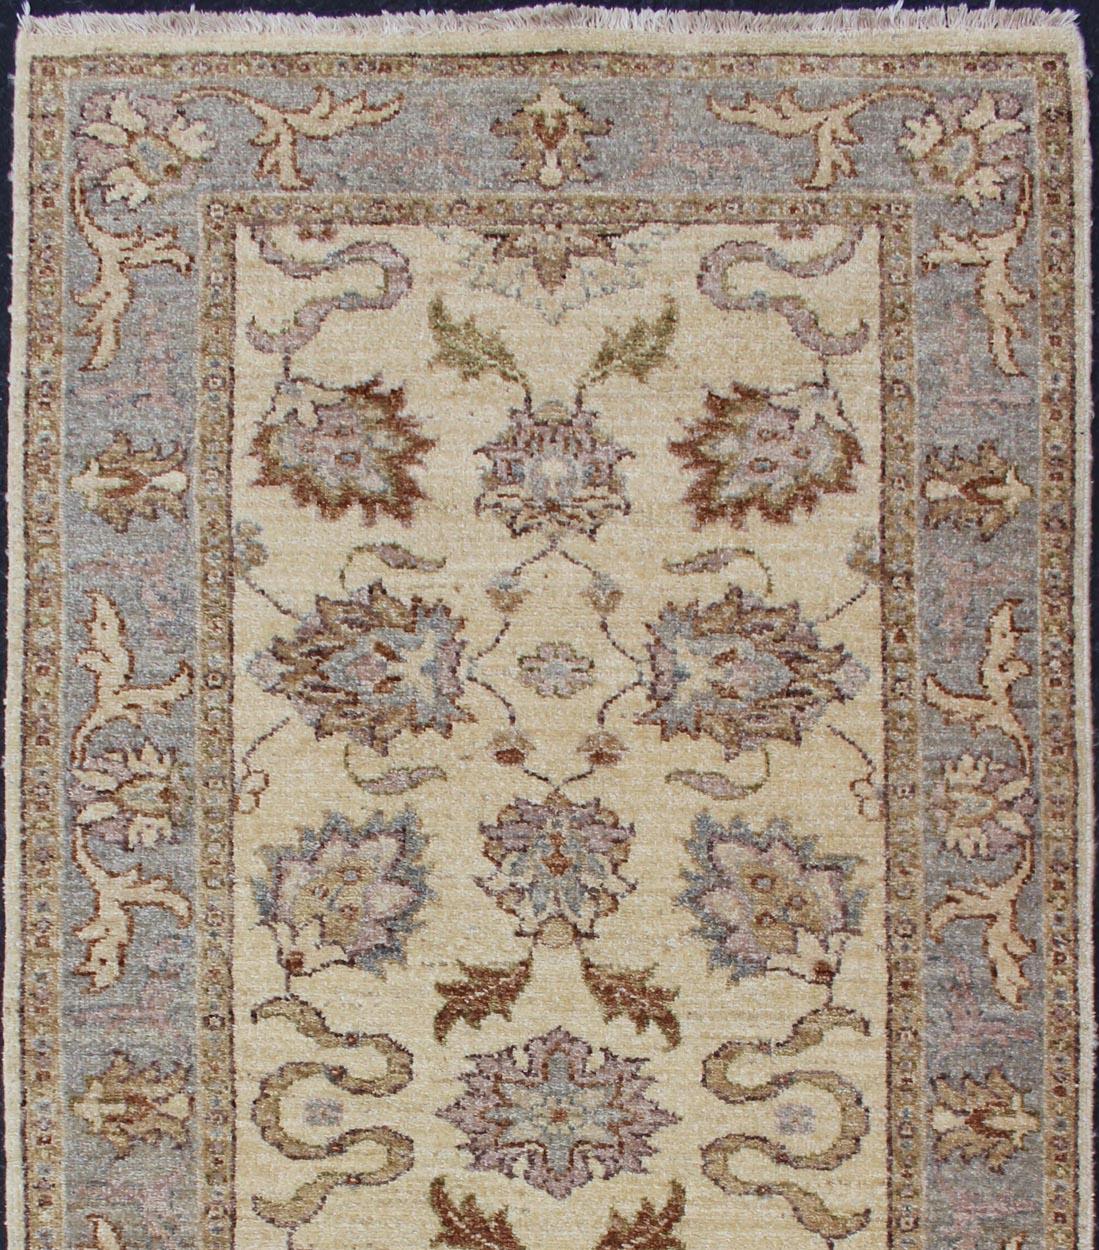 Cream and brown earth tone Afghan floral rug, Keivan Woven Arts / LH-A61965 country of origin / type: Afghan / circa 1980.

This handwoven rug is from Afghanistan and woven from the finest wool to create a soft and luxurious piece that will work